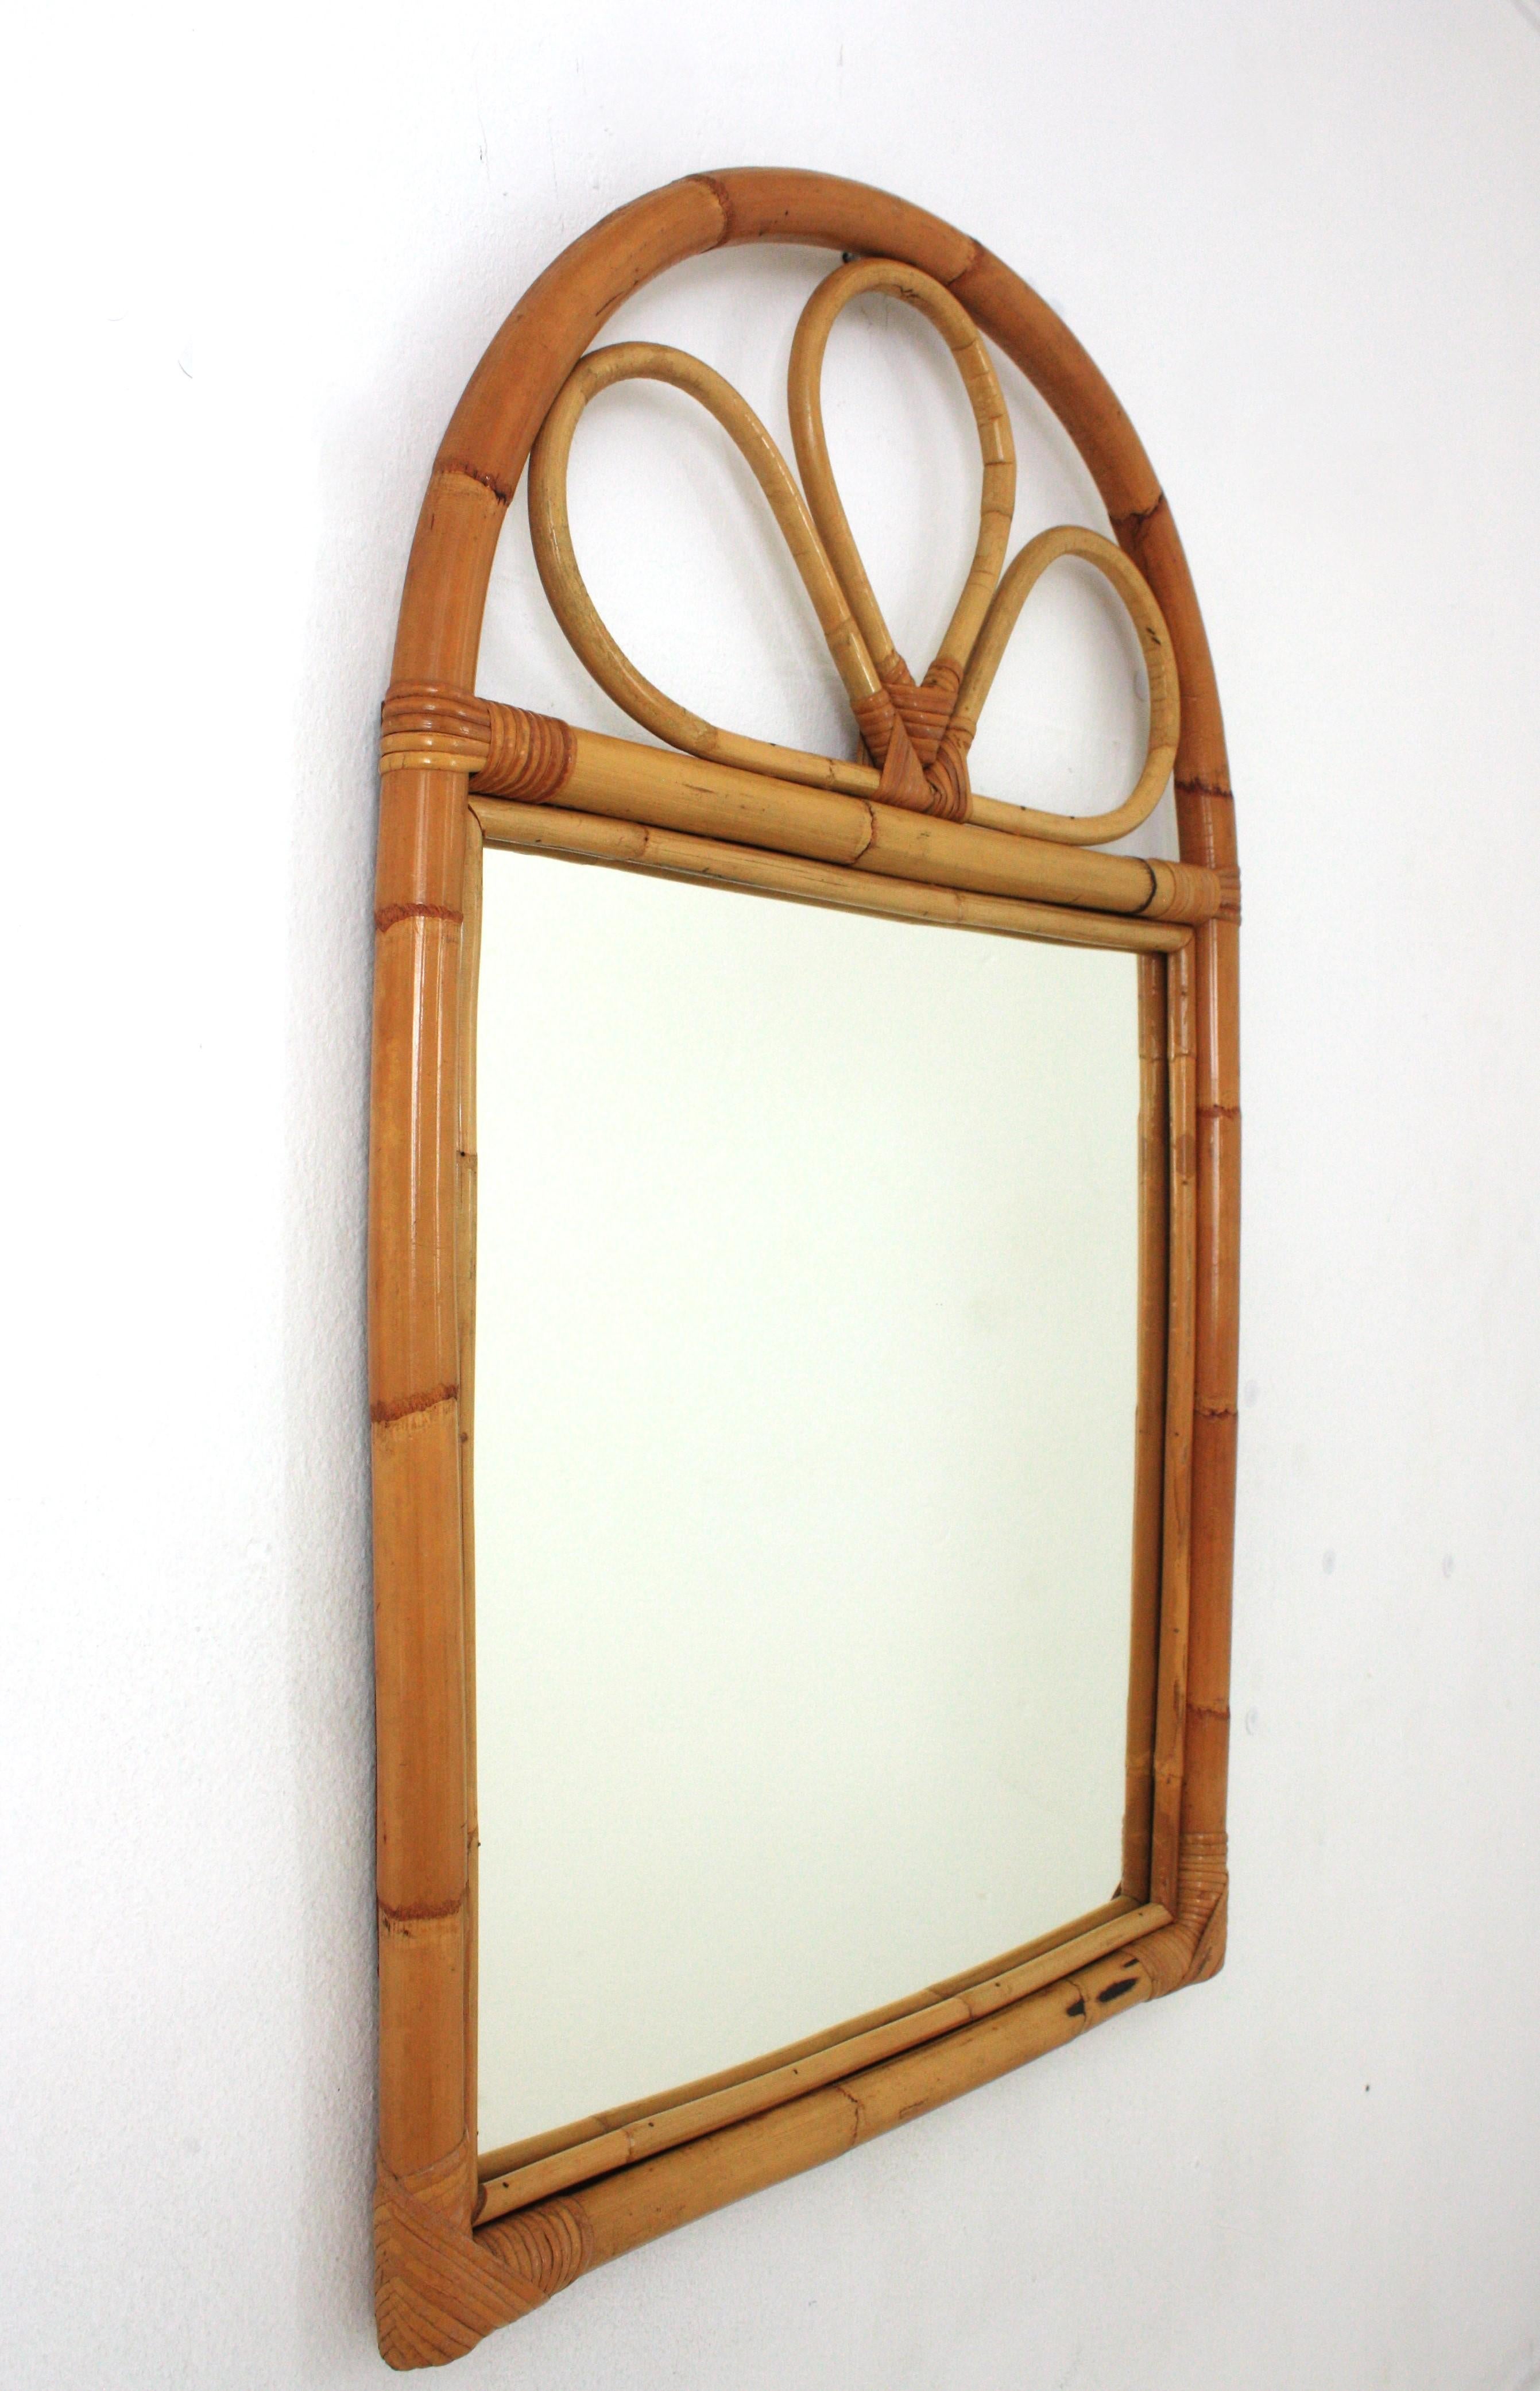 Hand-Crafted Spanish Rattan Bamboo Mirror with Arched Top, 1960s For Sale